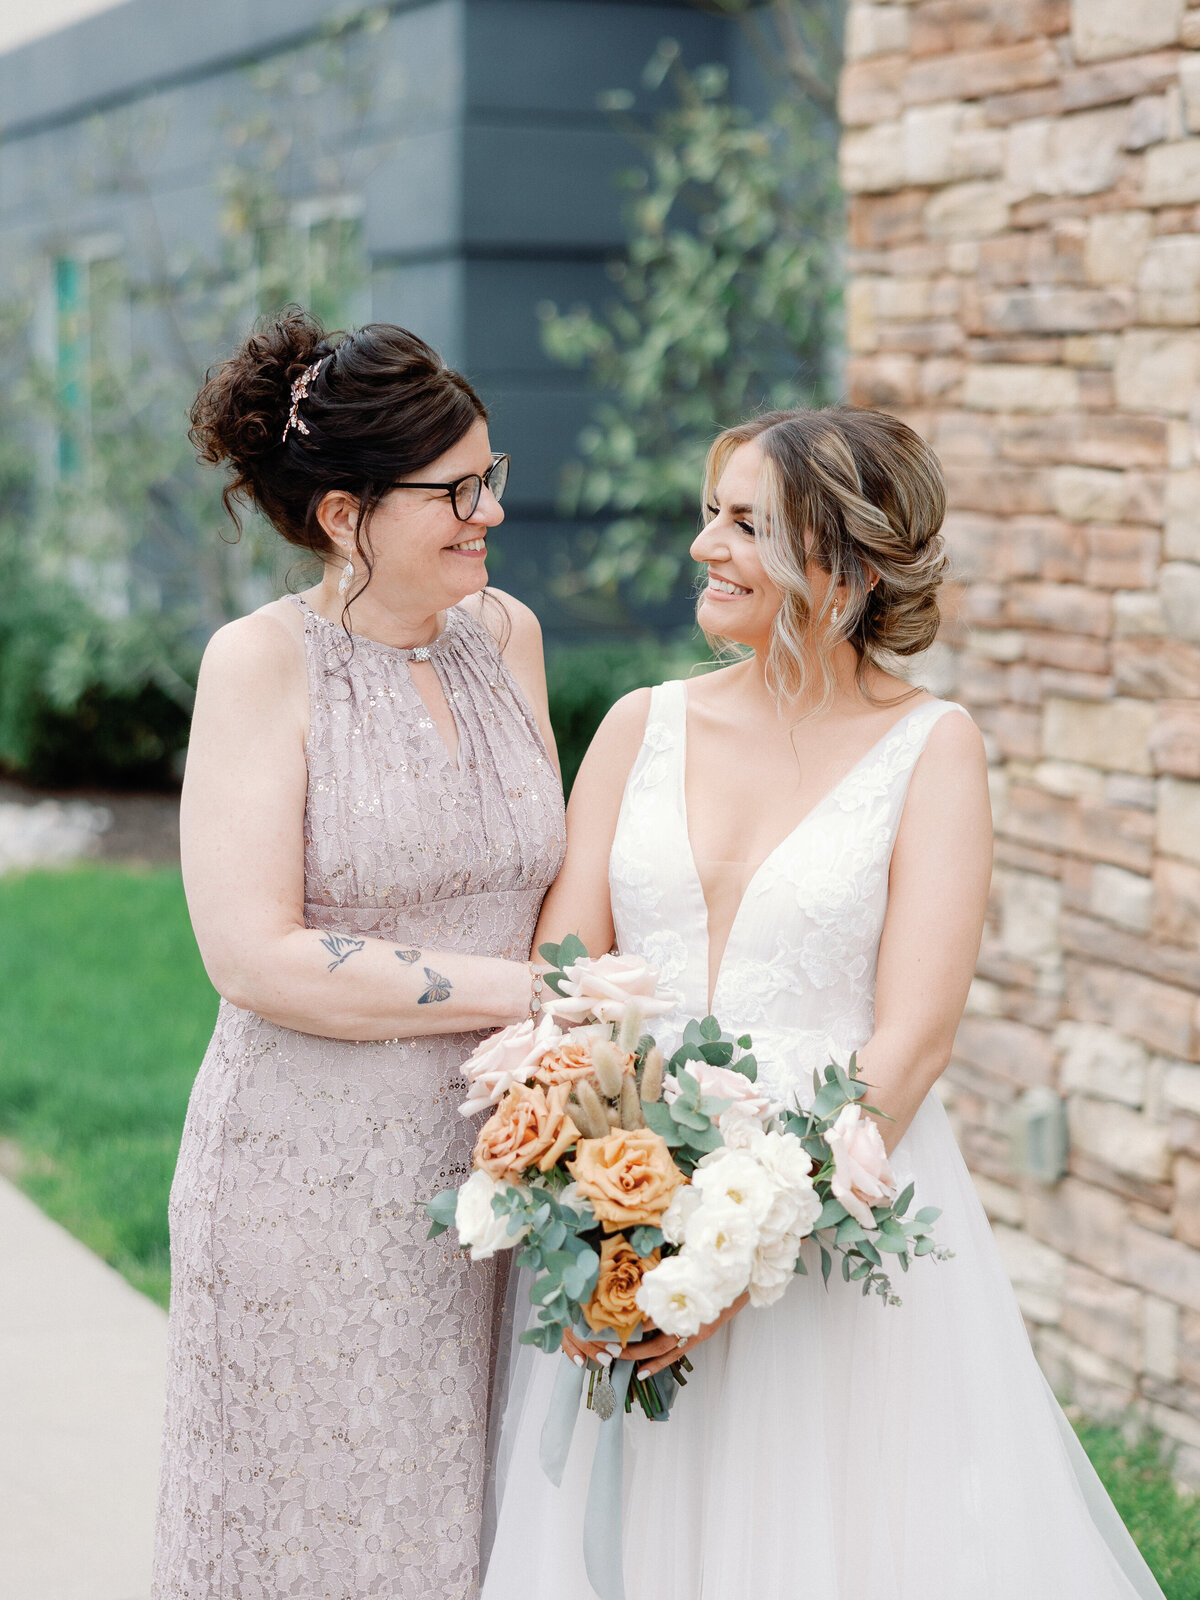 A bride and her mom share a touching moment as the bride gets ready for her wedding